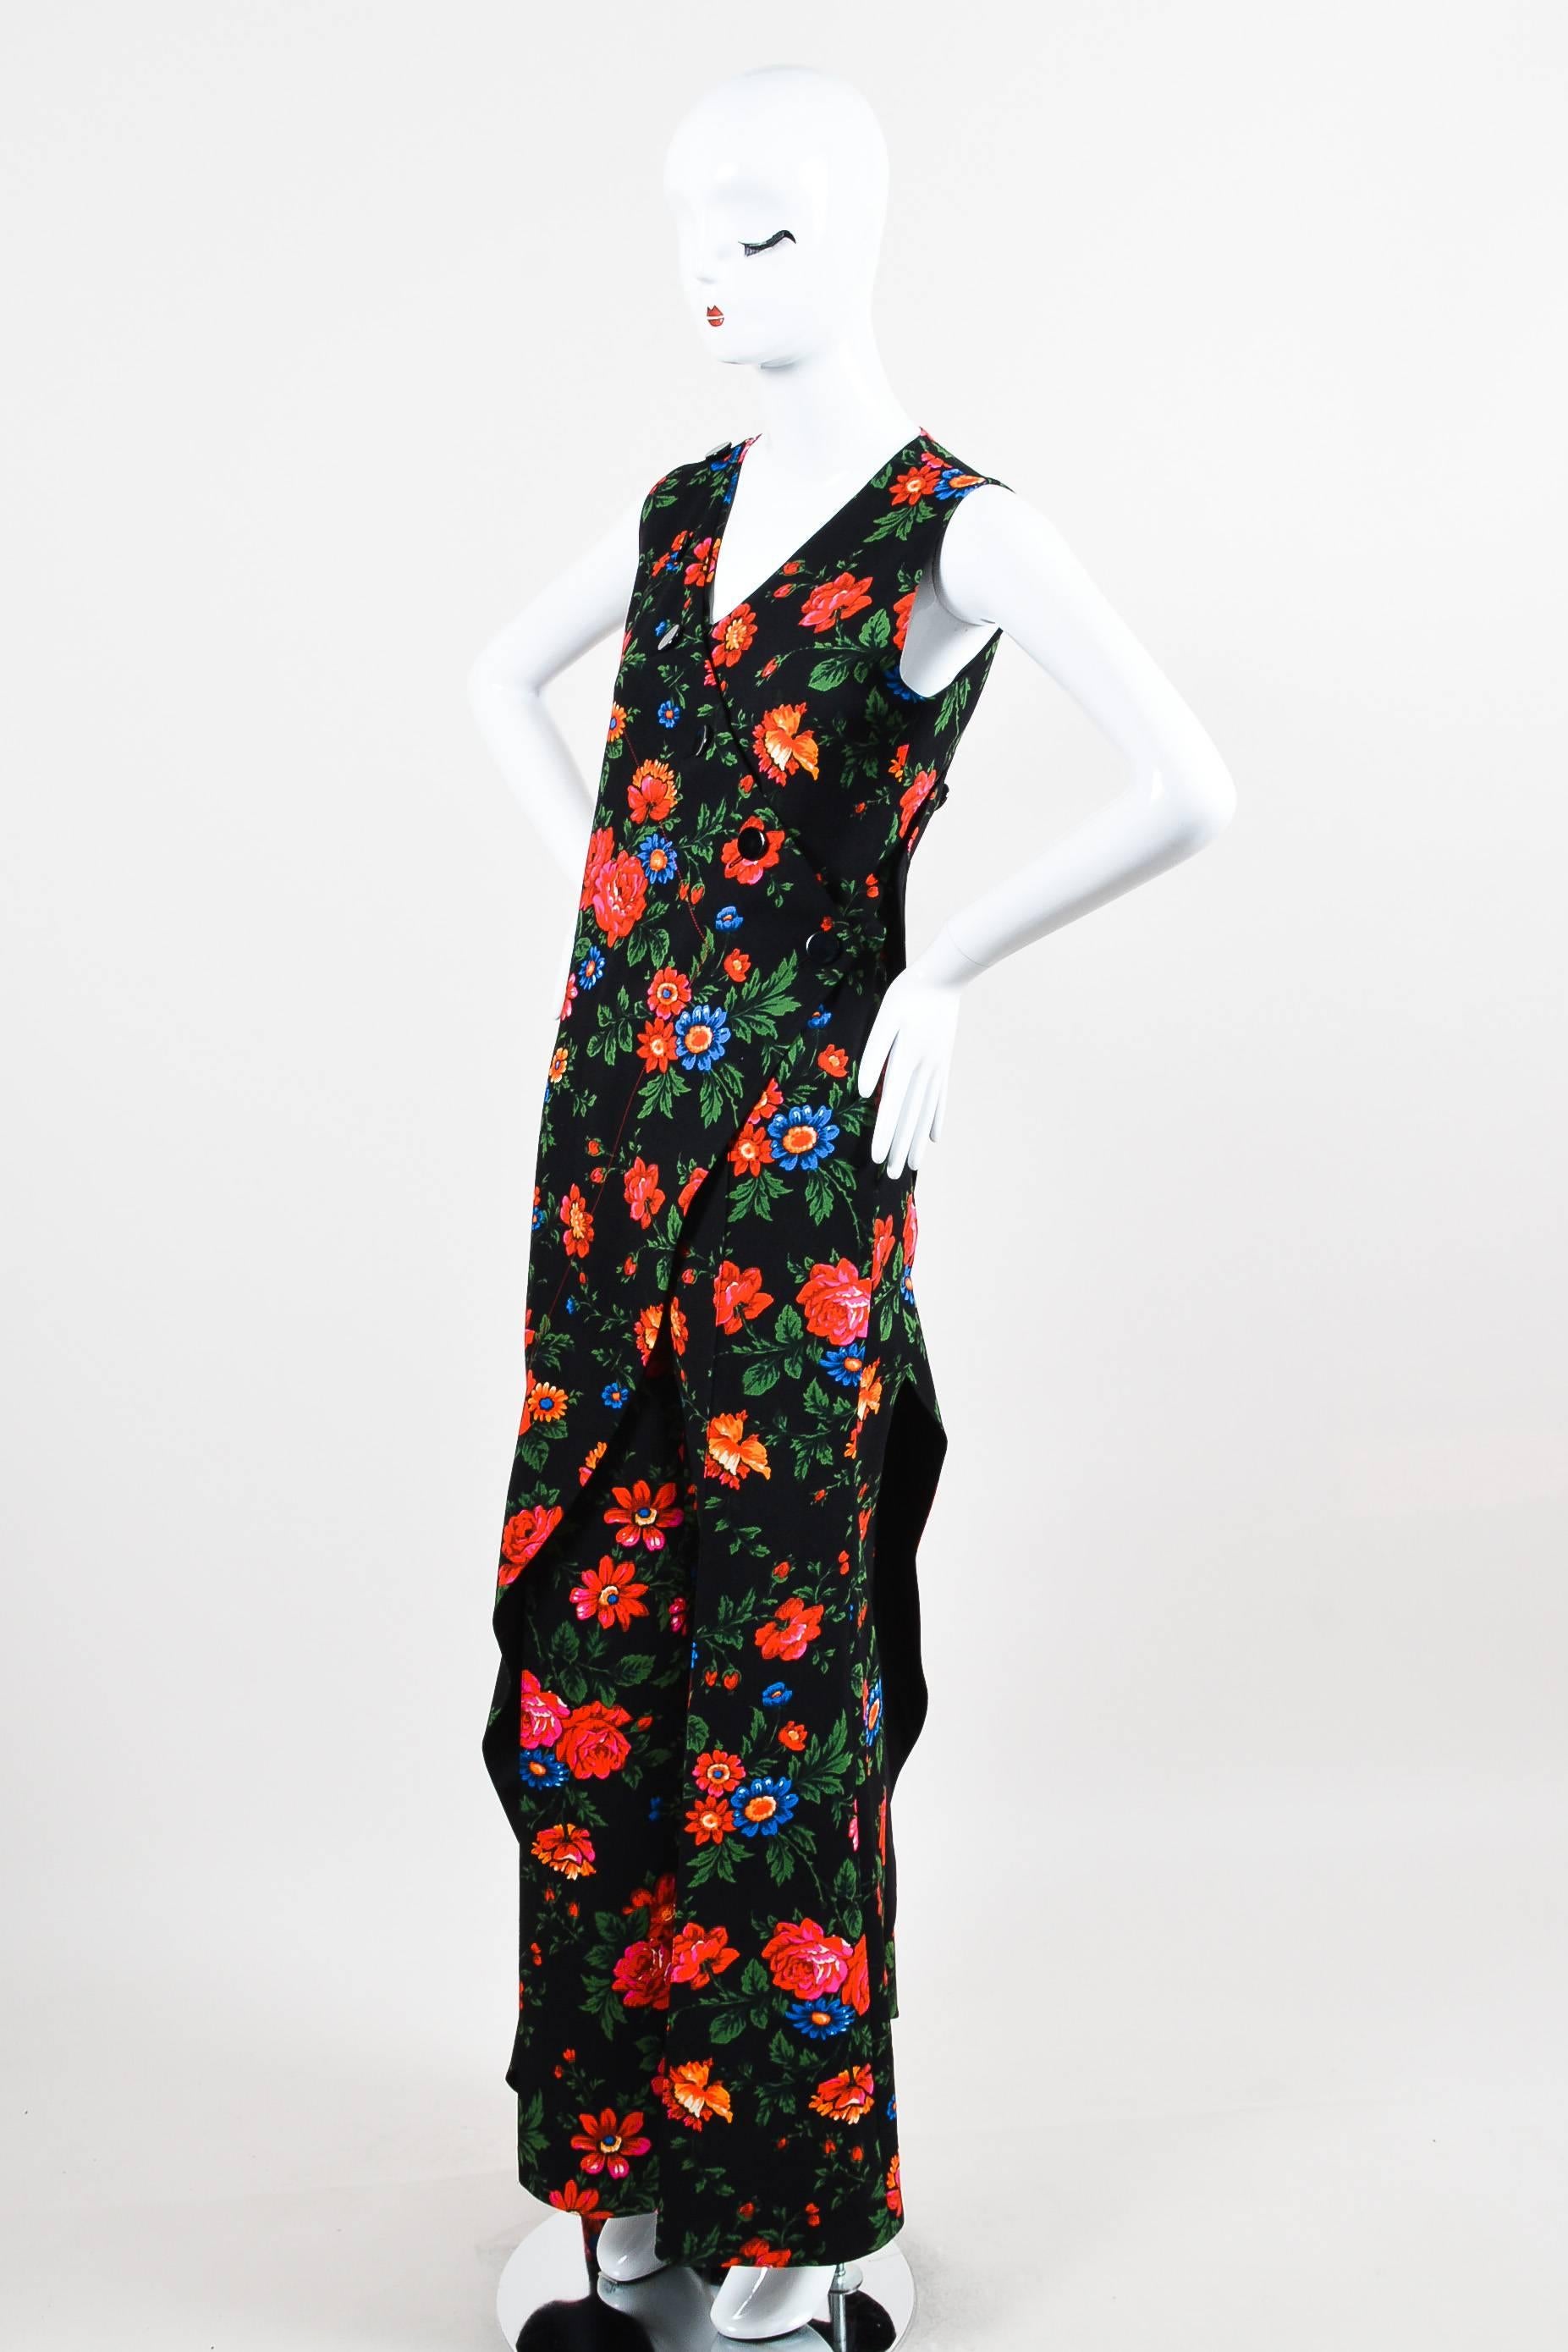 Celine black crepe pantsuit featuring a multicolor floral print pattern and draped, wrap layer along front and back. Designed with shiny button closures and wide legs. Sleeveless. Lined.